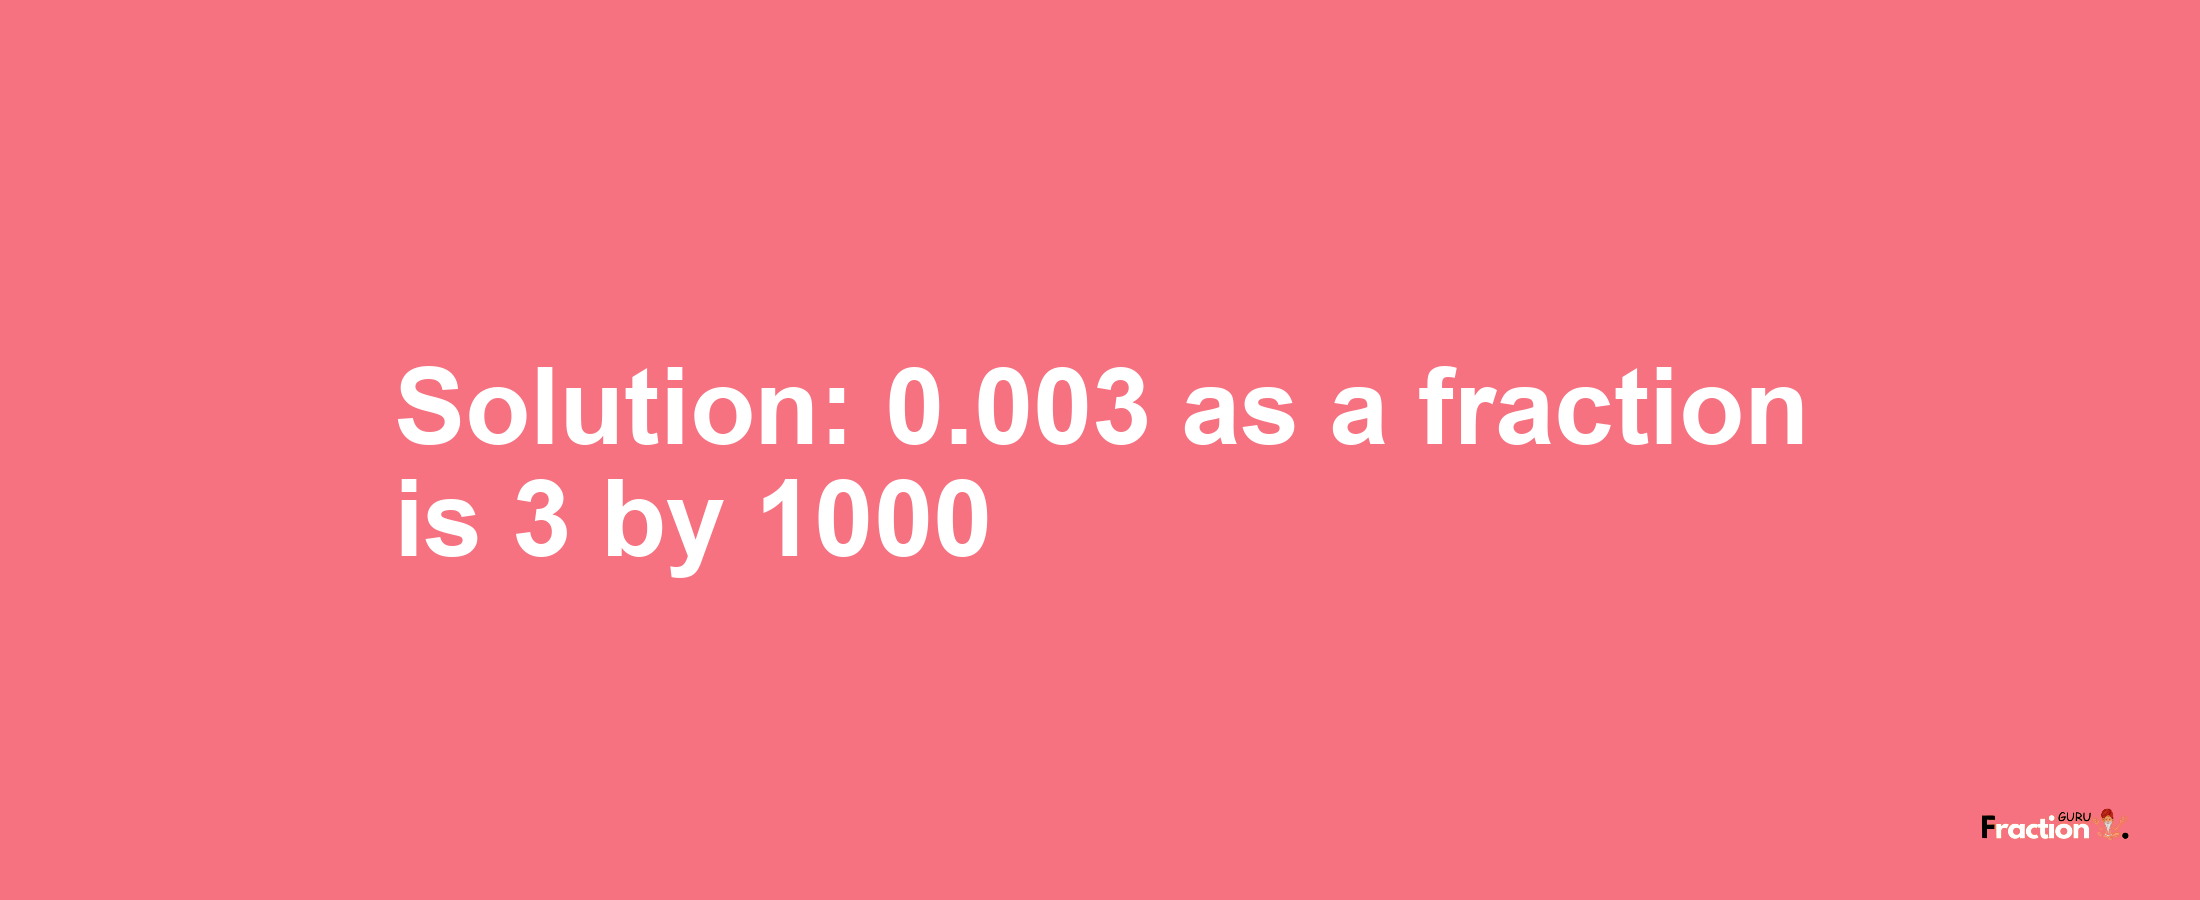 Solution:0.003 as a fraction is 3/1000